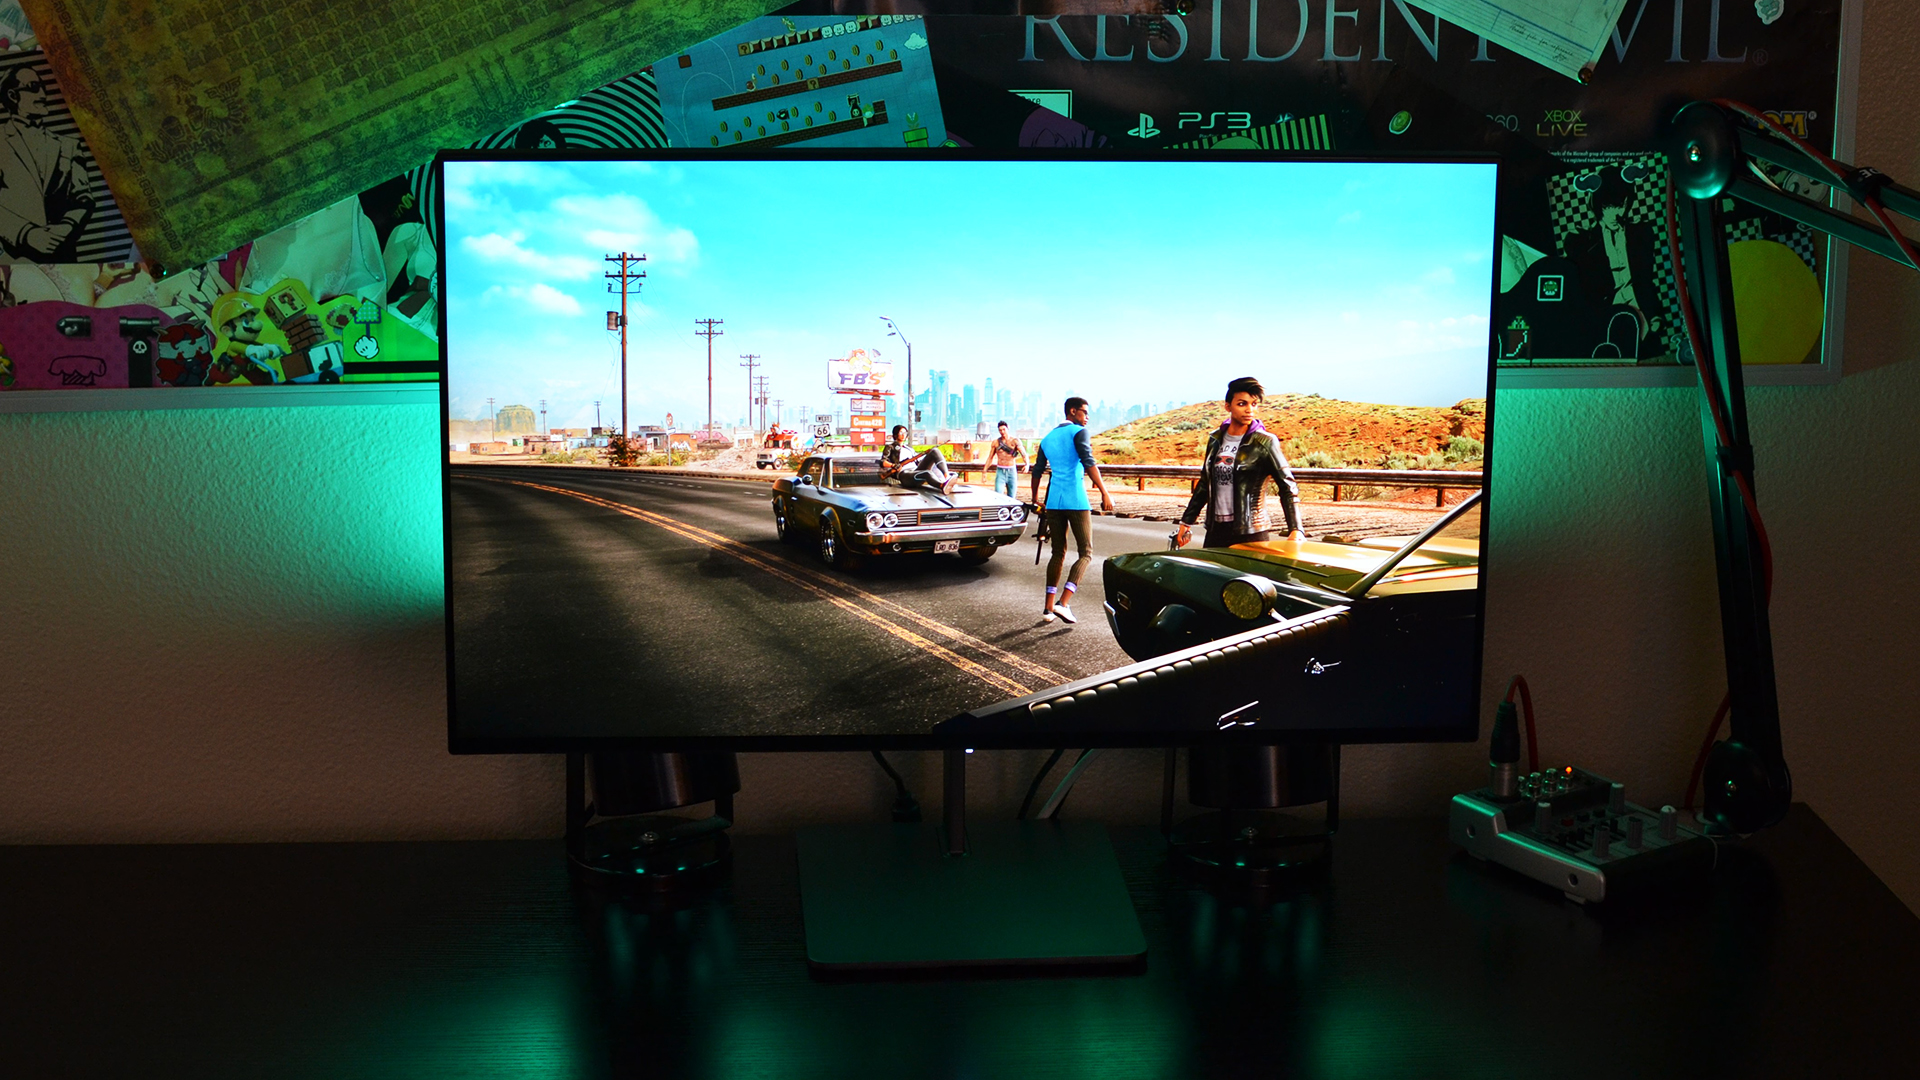 The Dough Spectrum 4K 144Hz glossy monitor is an impressive ...